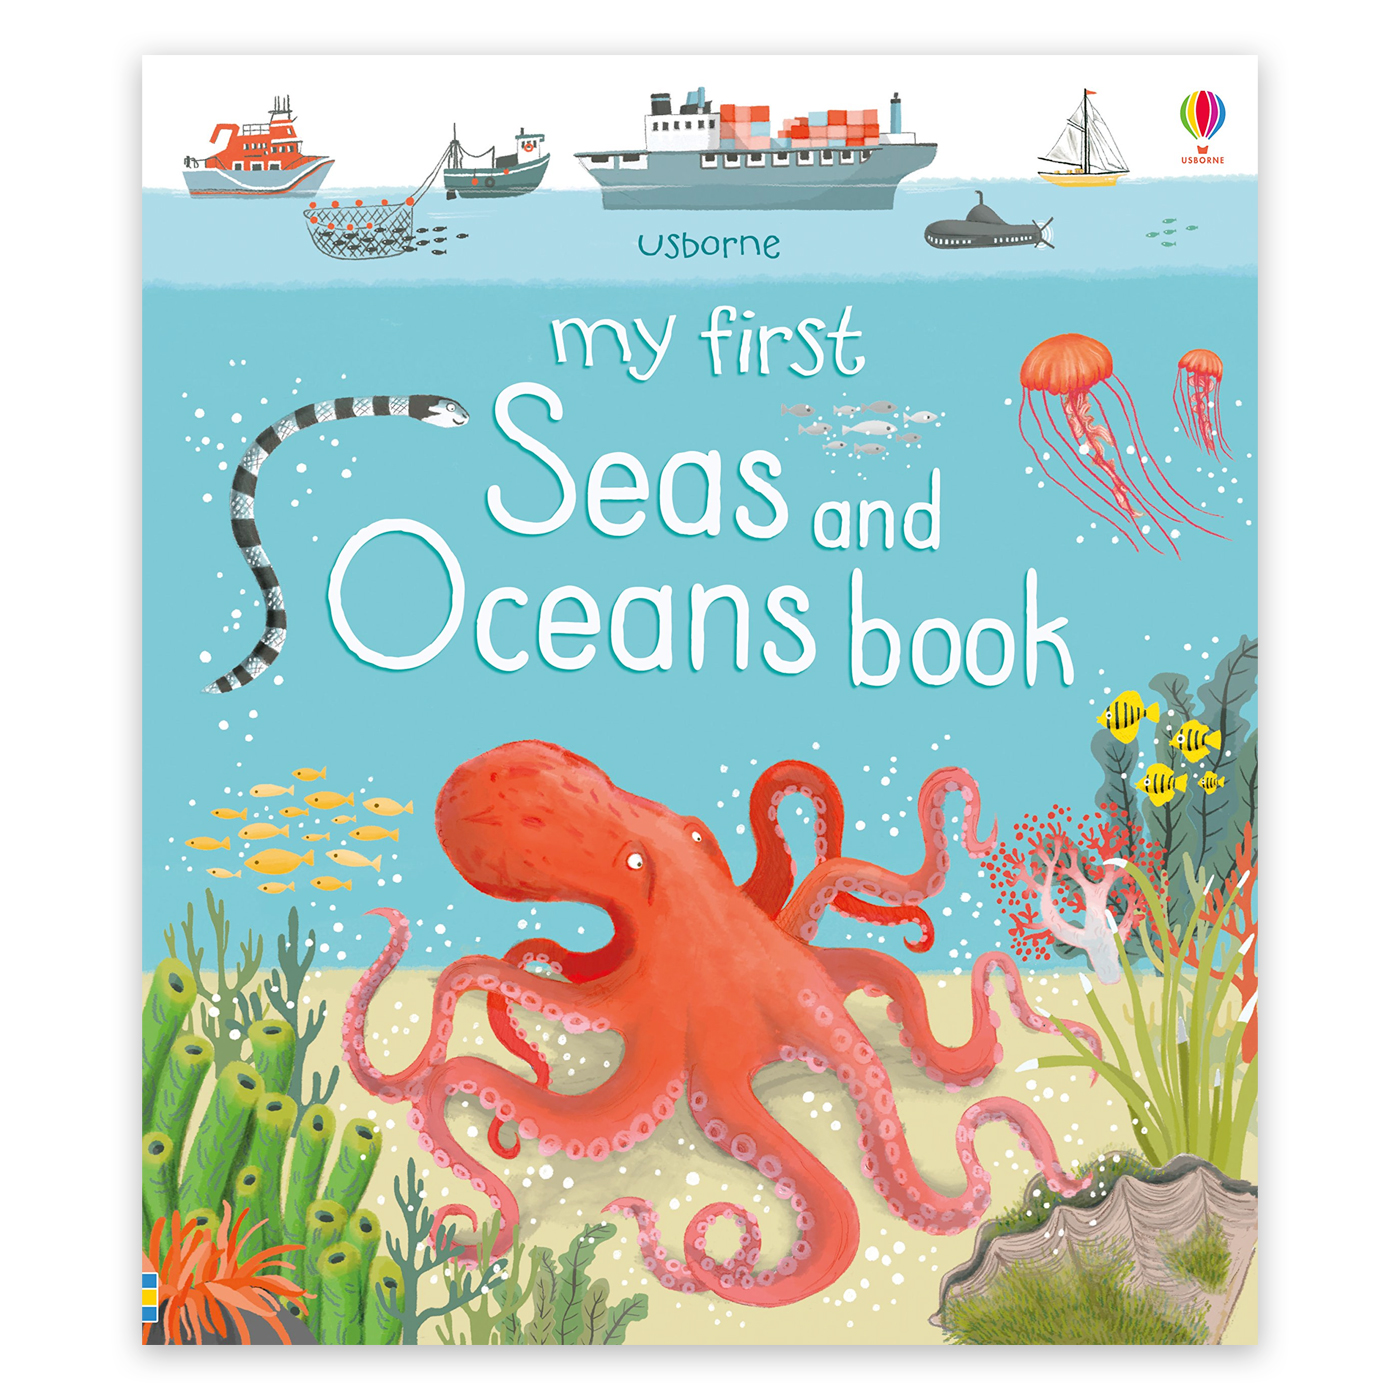  My First Seas and Oceans Book